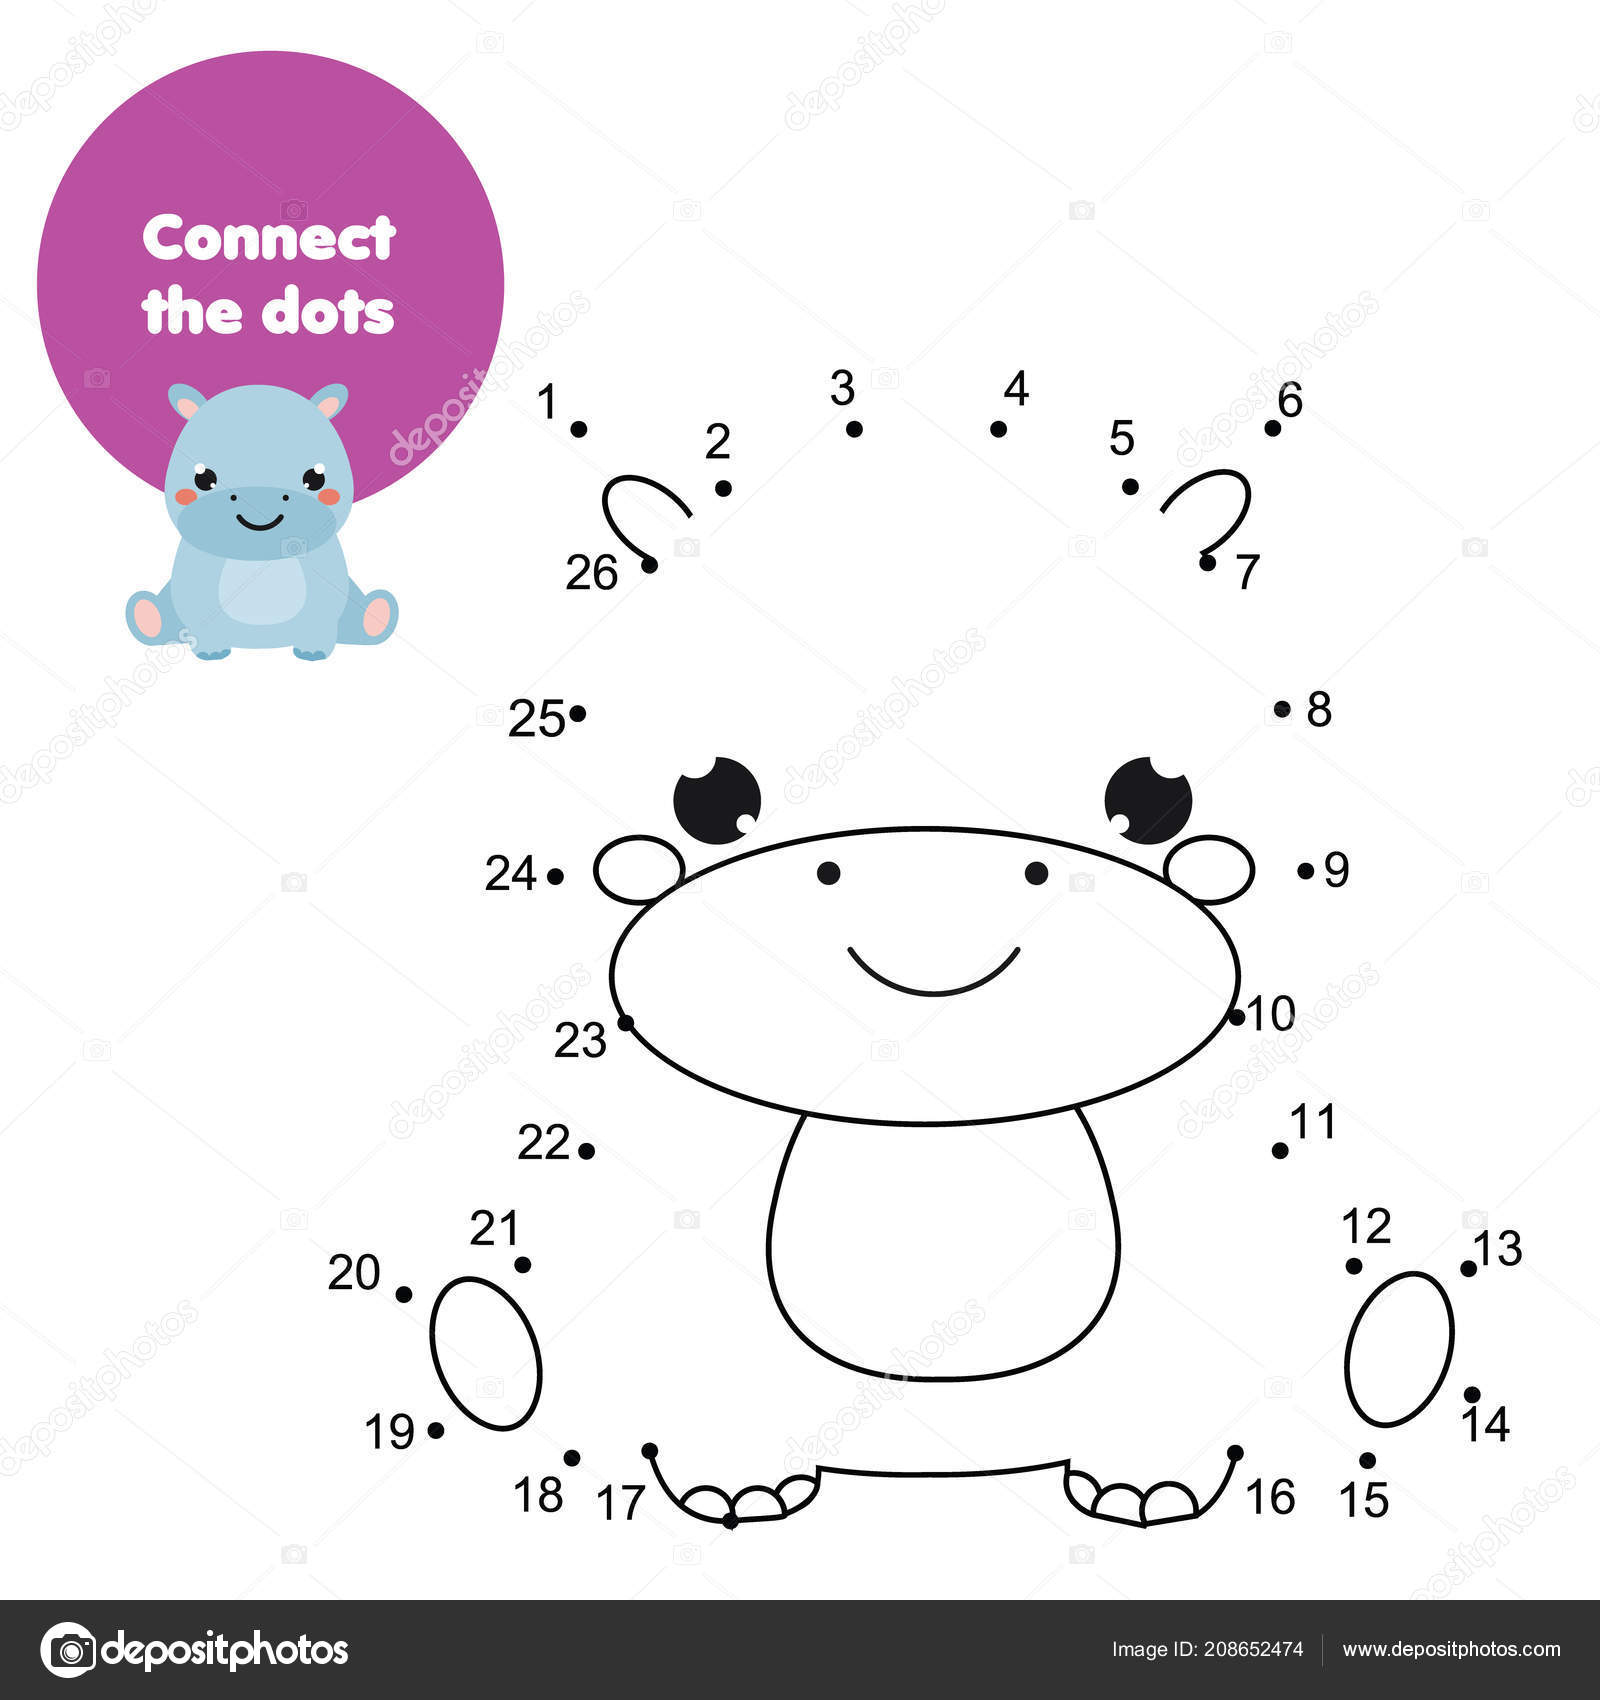 connect-the-dots-image